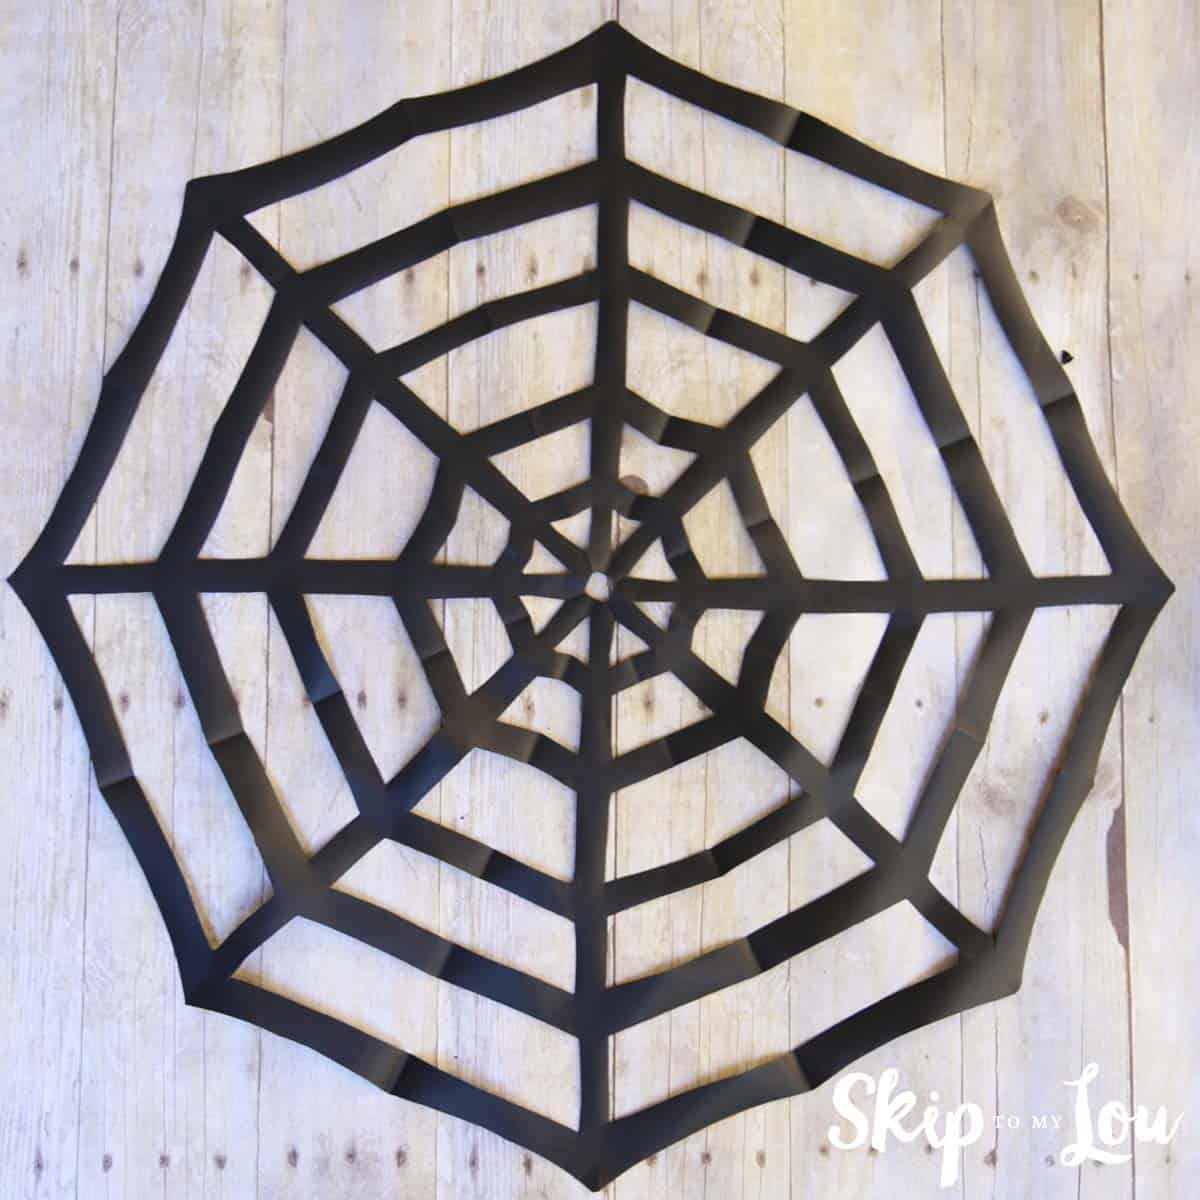 how-to-make-a-paper-spider-web-skip-to-my-lou-bloglovin